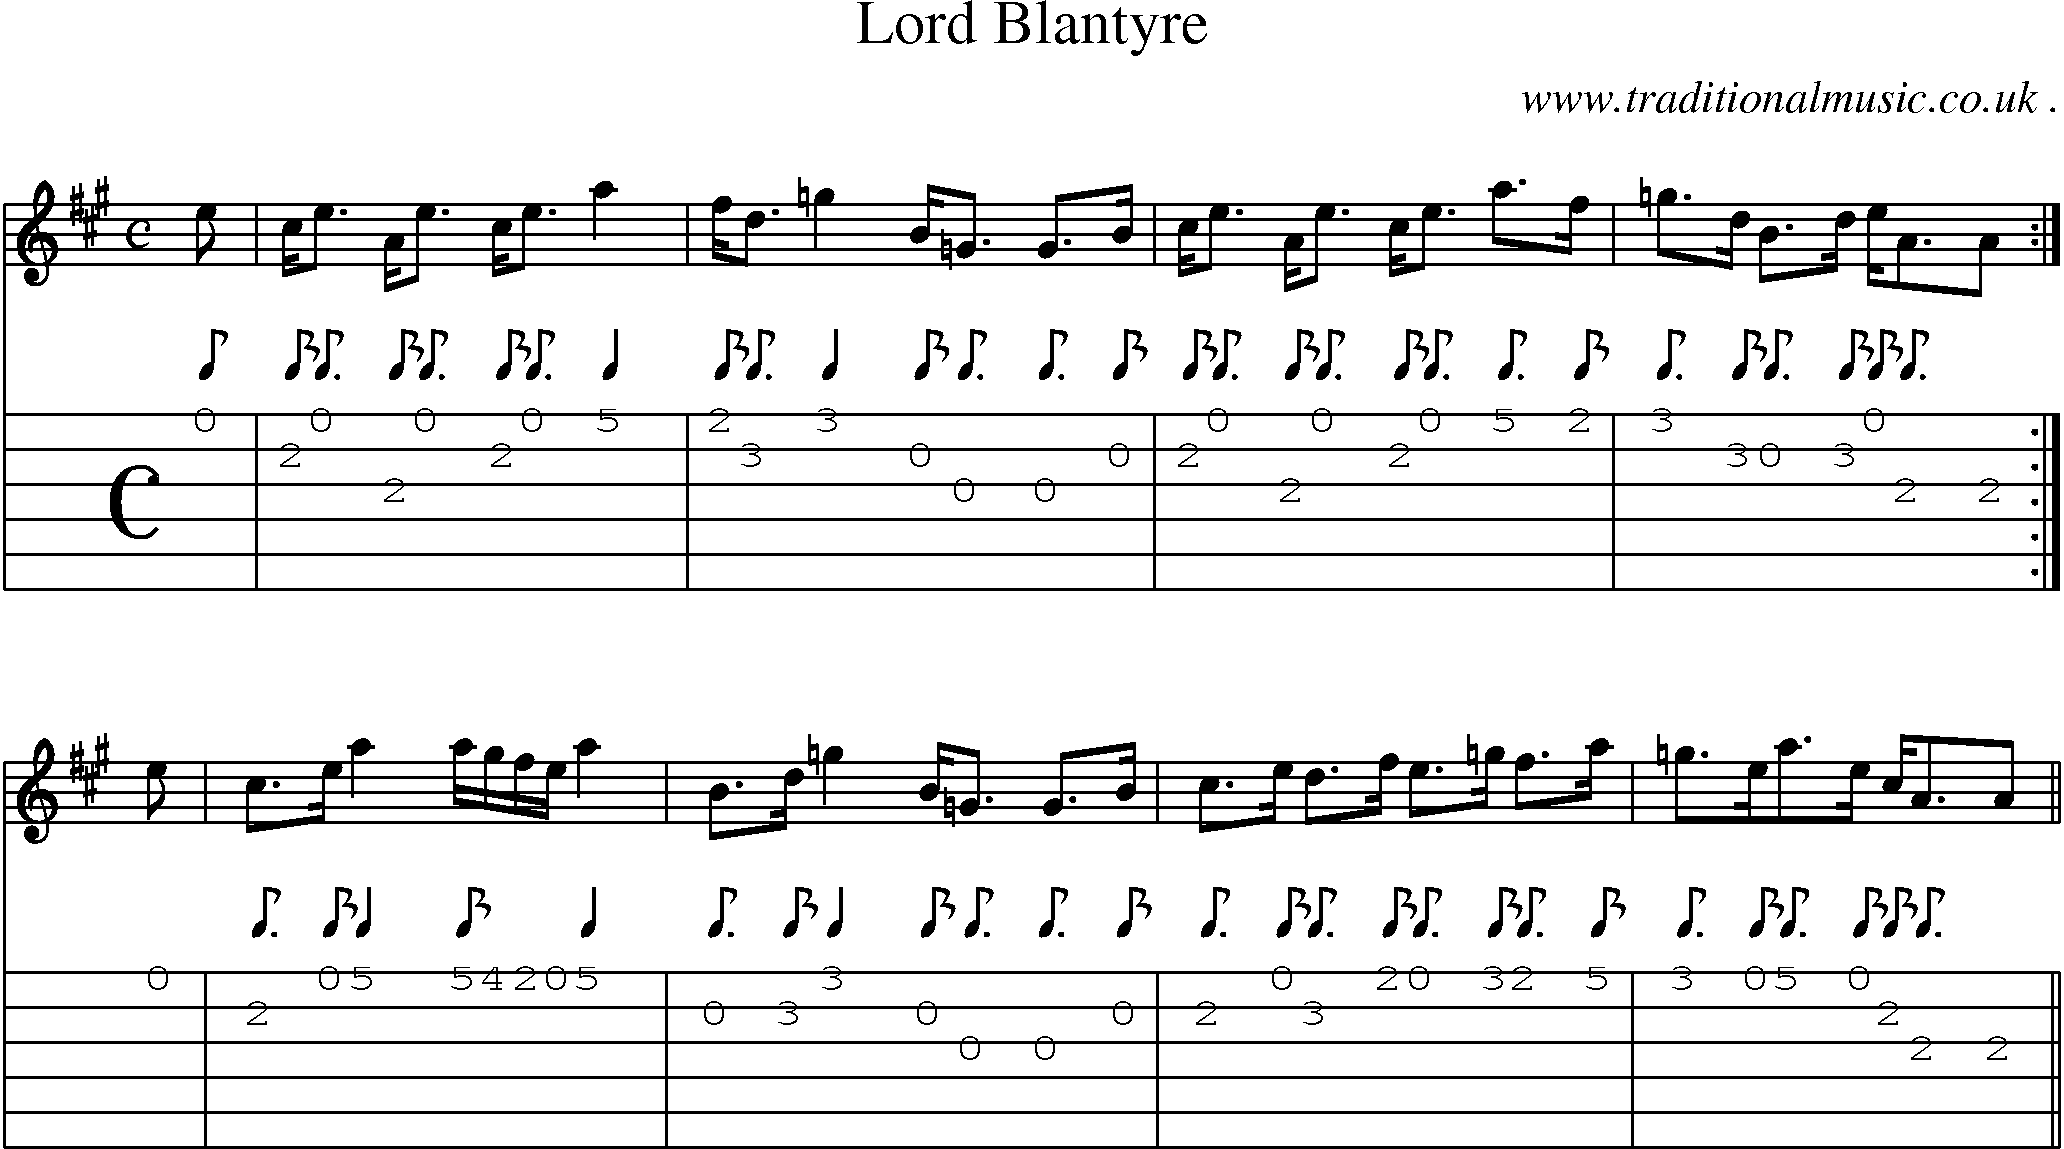 Sheet-music  score, Chords and Guitar Tabs for Lord Blantyre